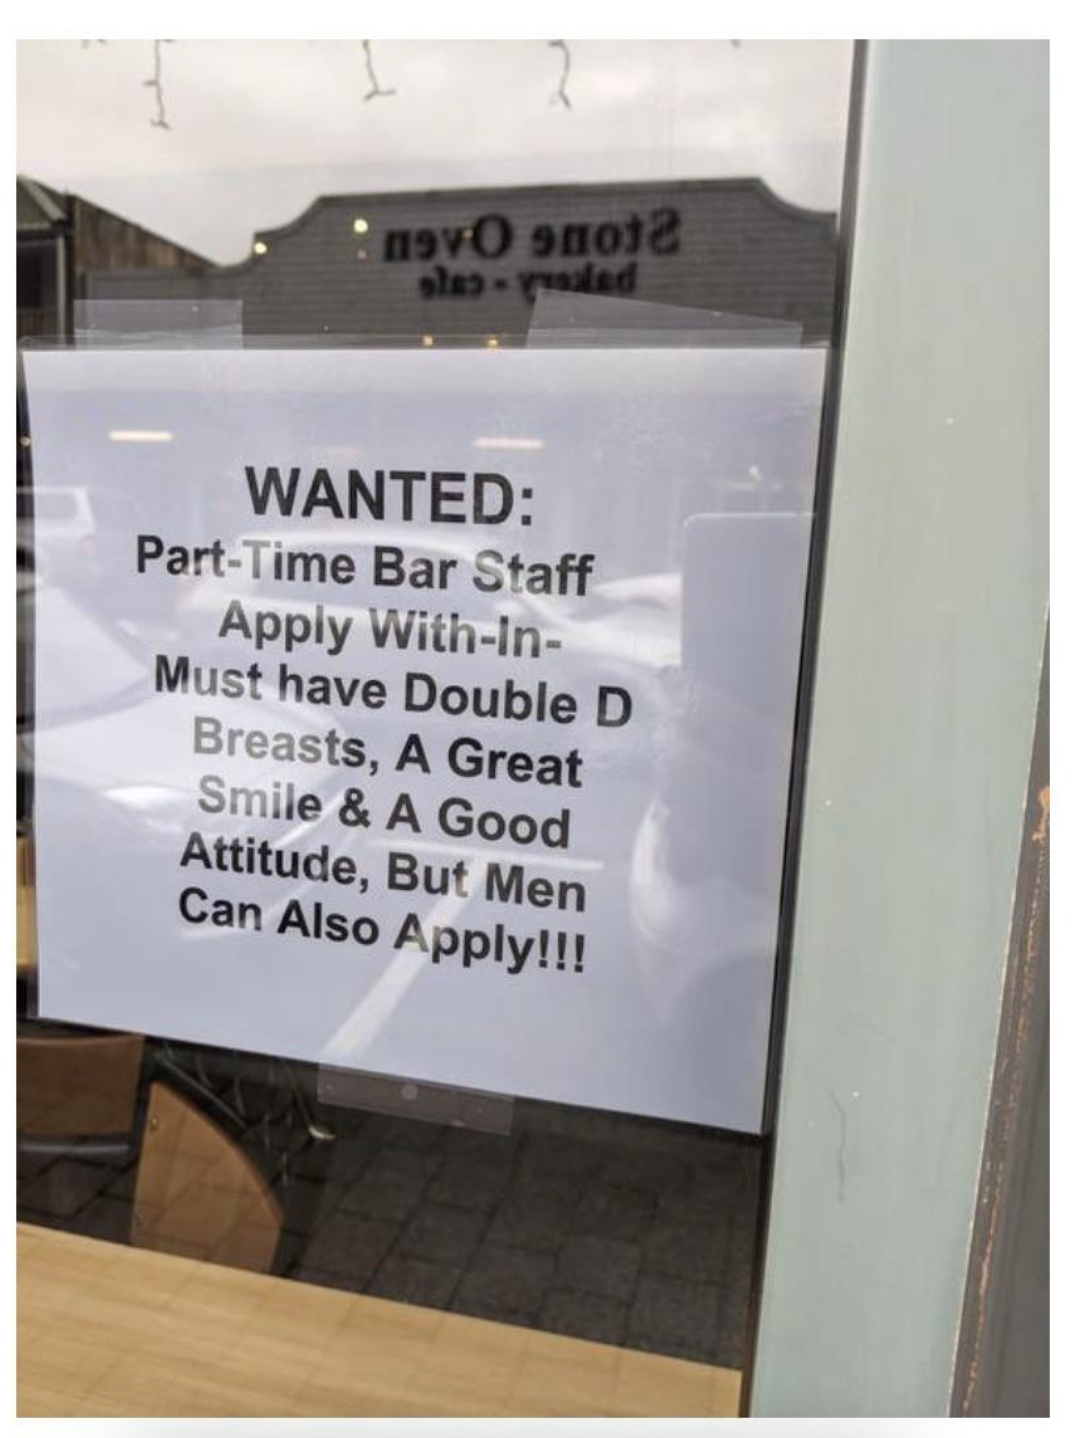 &quot;Wanted&quot; ad on door: &quot;Part-time bar staff&quot; &quot;must have double D breasts, a great smile, and a good attitude, but men can also apply!!!&quot;